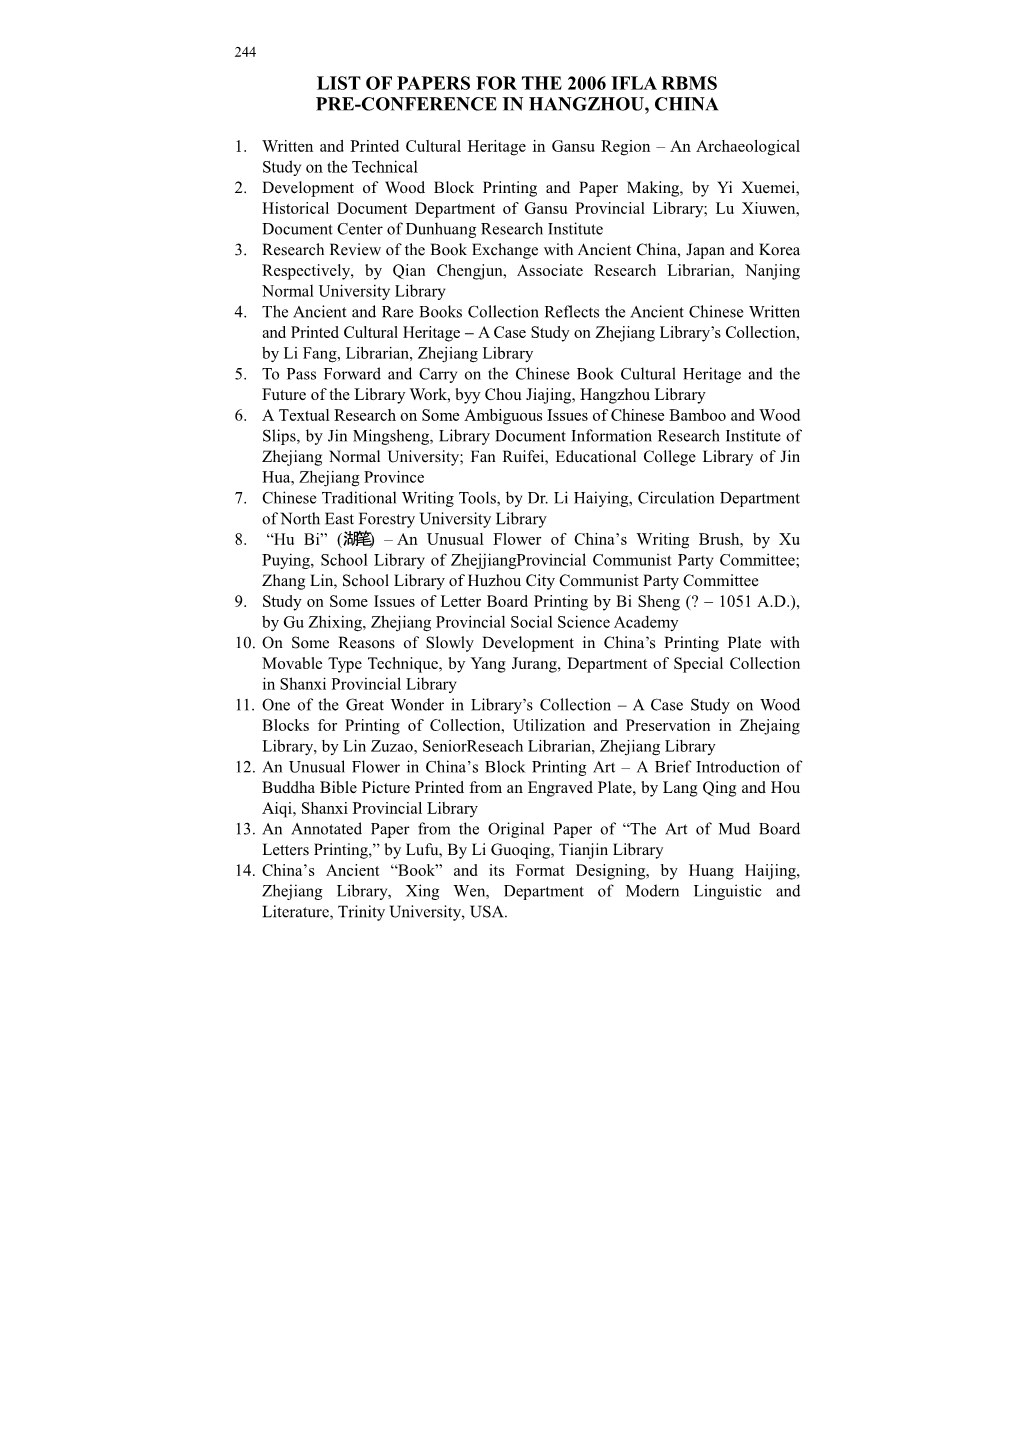 List of Papers for the 2006 Ifla Rbms Pre-Conference in Hangzhou, China